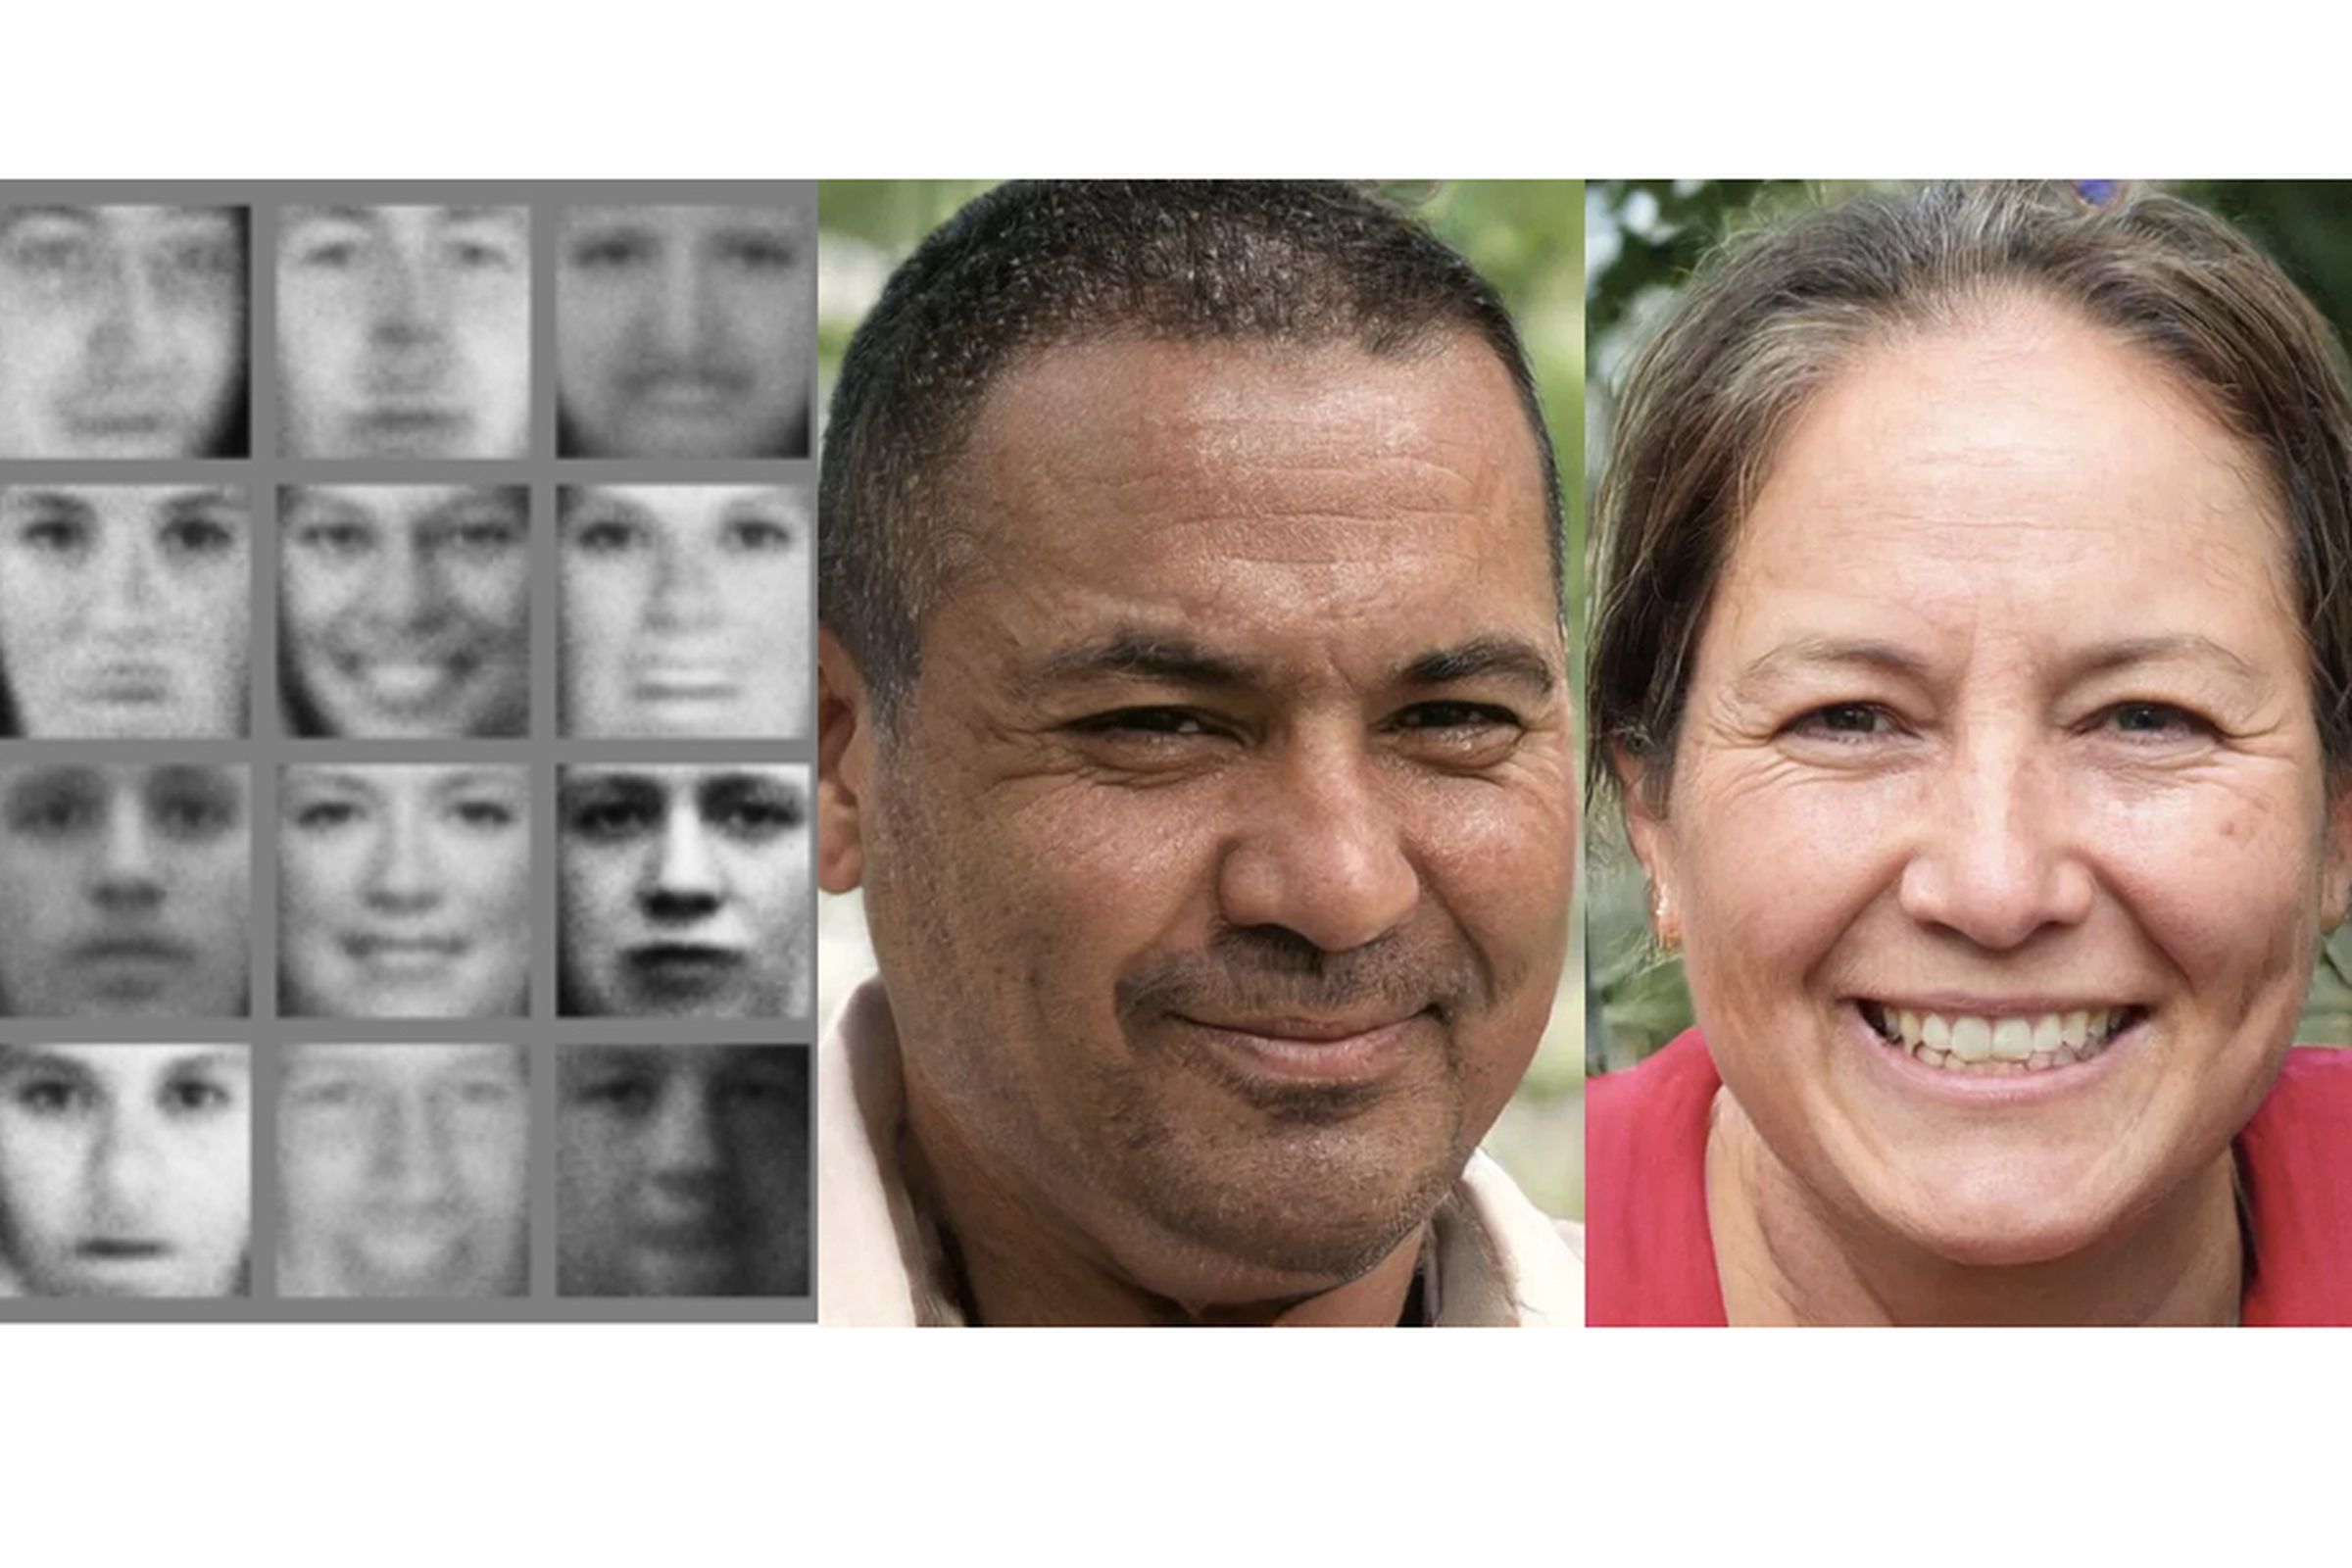 The faces on the left were created by AI in 2014; on the right are ones made by AI in 2018. 